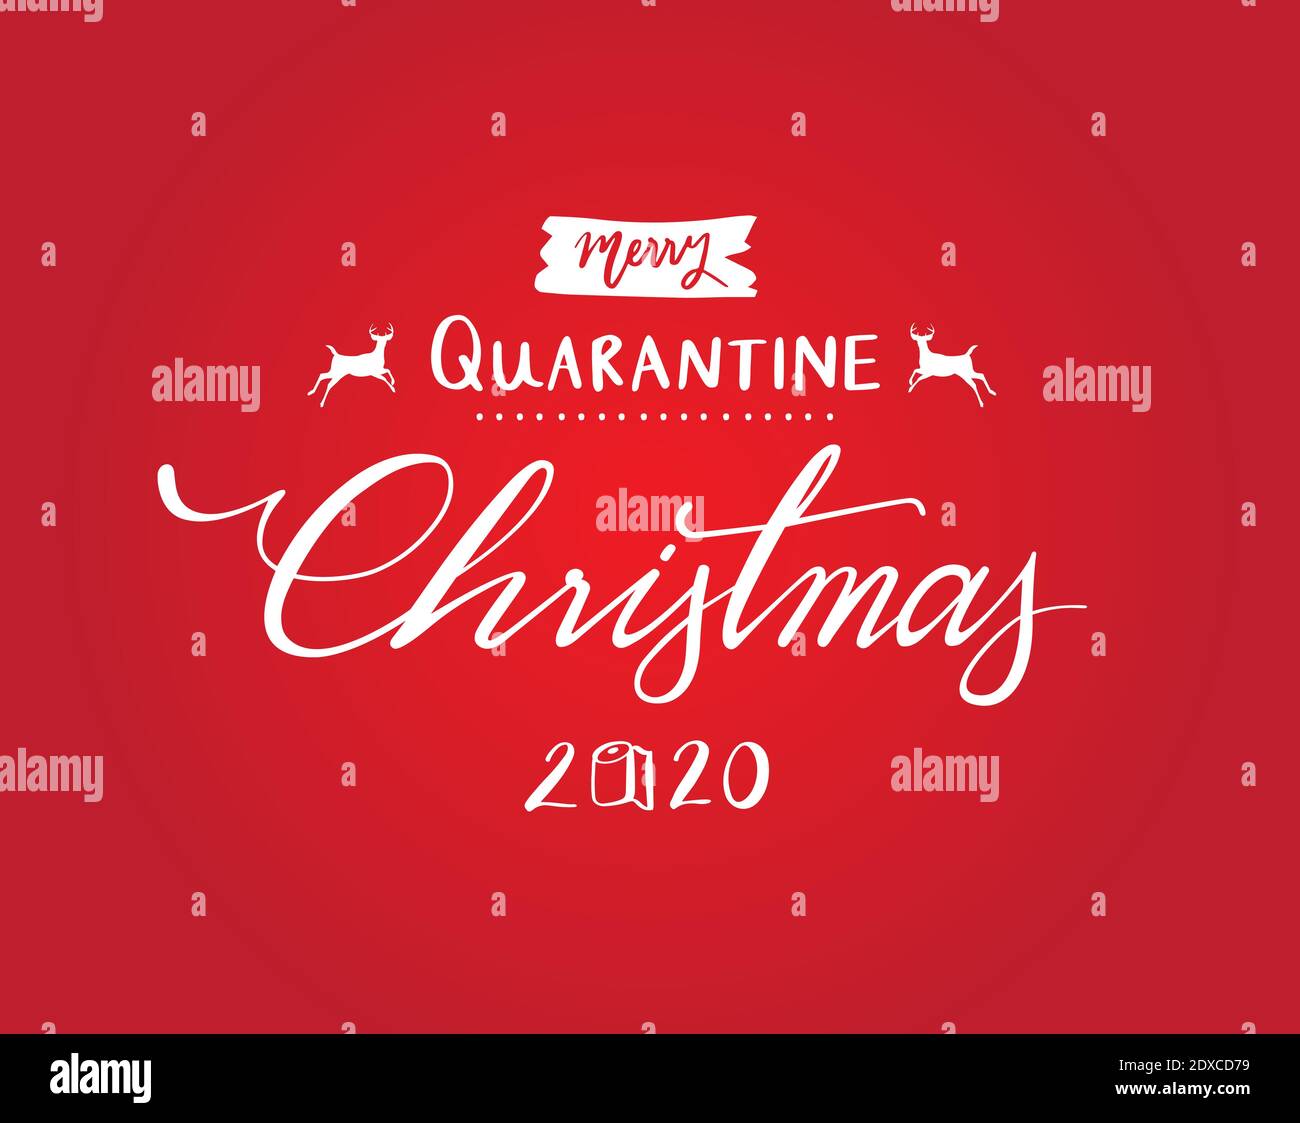 Merry quarantine Christmas 2020 hand drawn text on red background Stock Vector